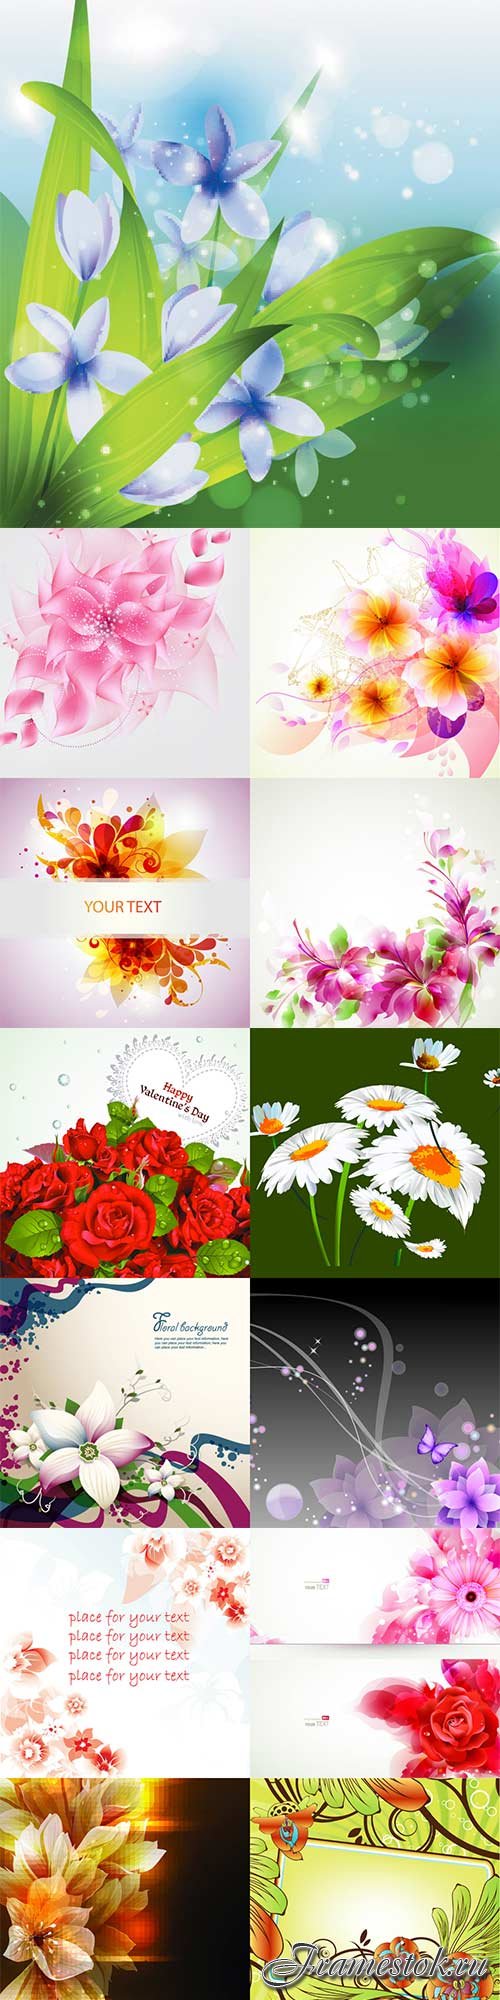 Awesome vector flowers - 14